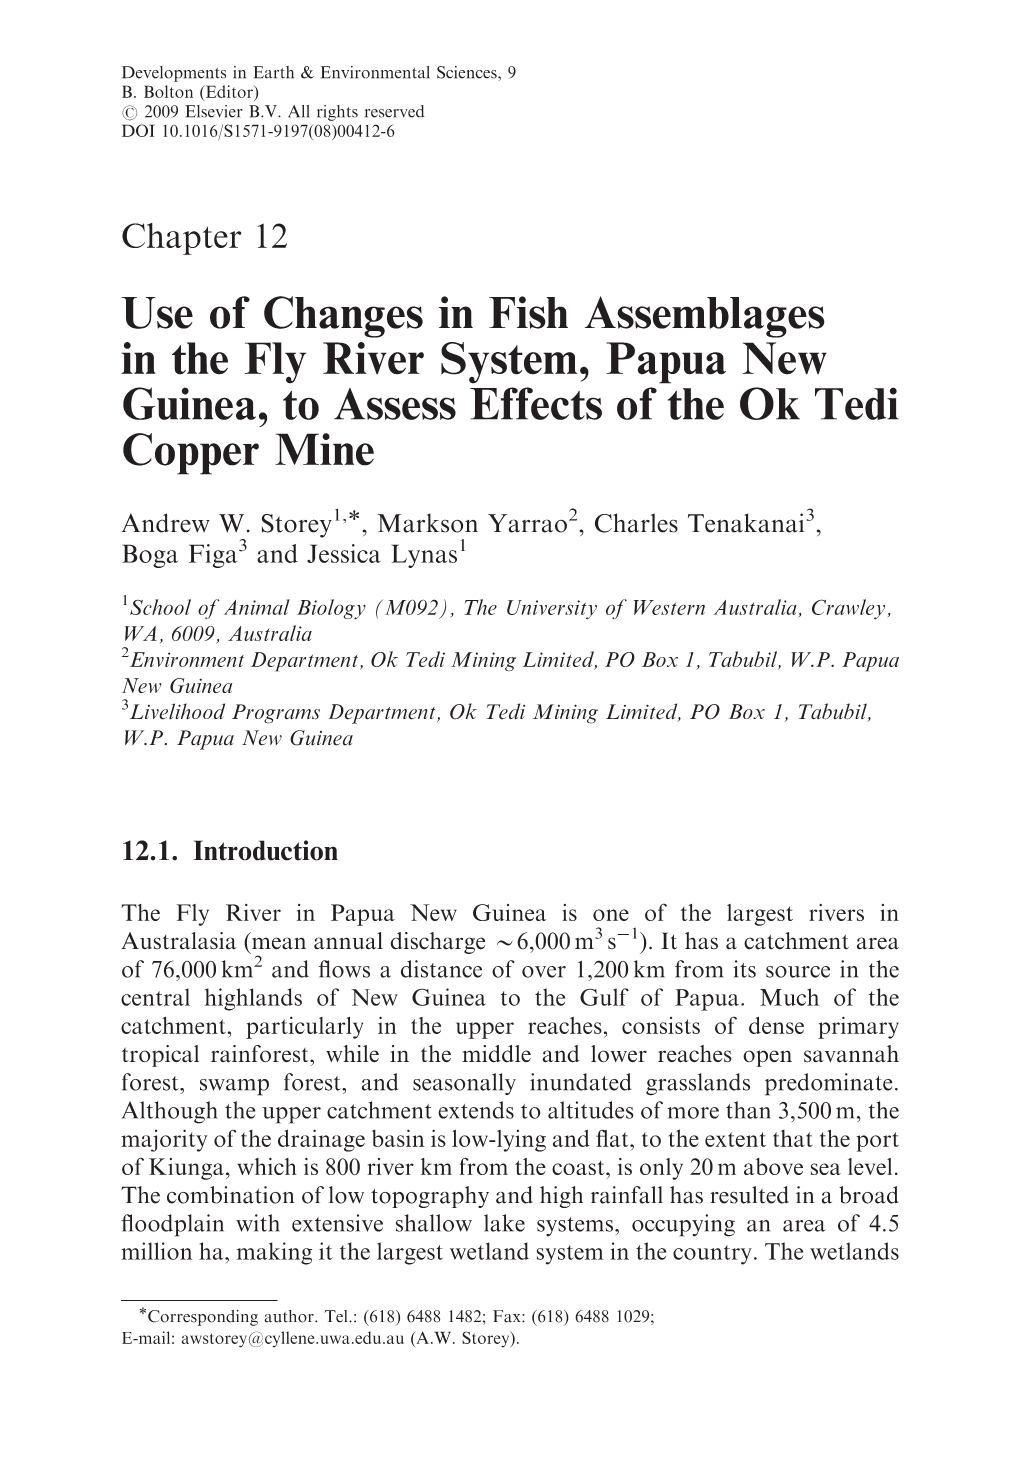 Use of Changes in Fish Assemblages in the Fly River System, Papua New Guinea, to Assess Effects of the Ok Tedi Copper Mine